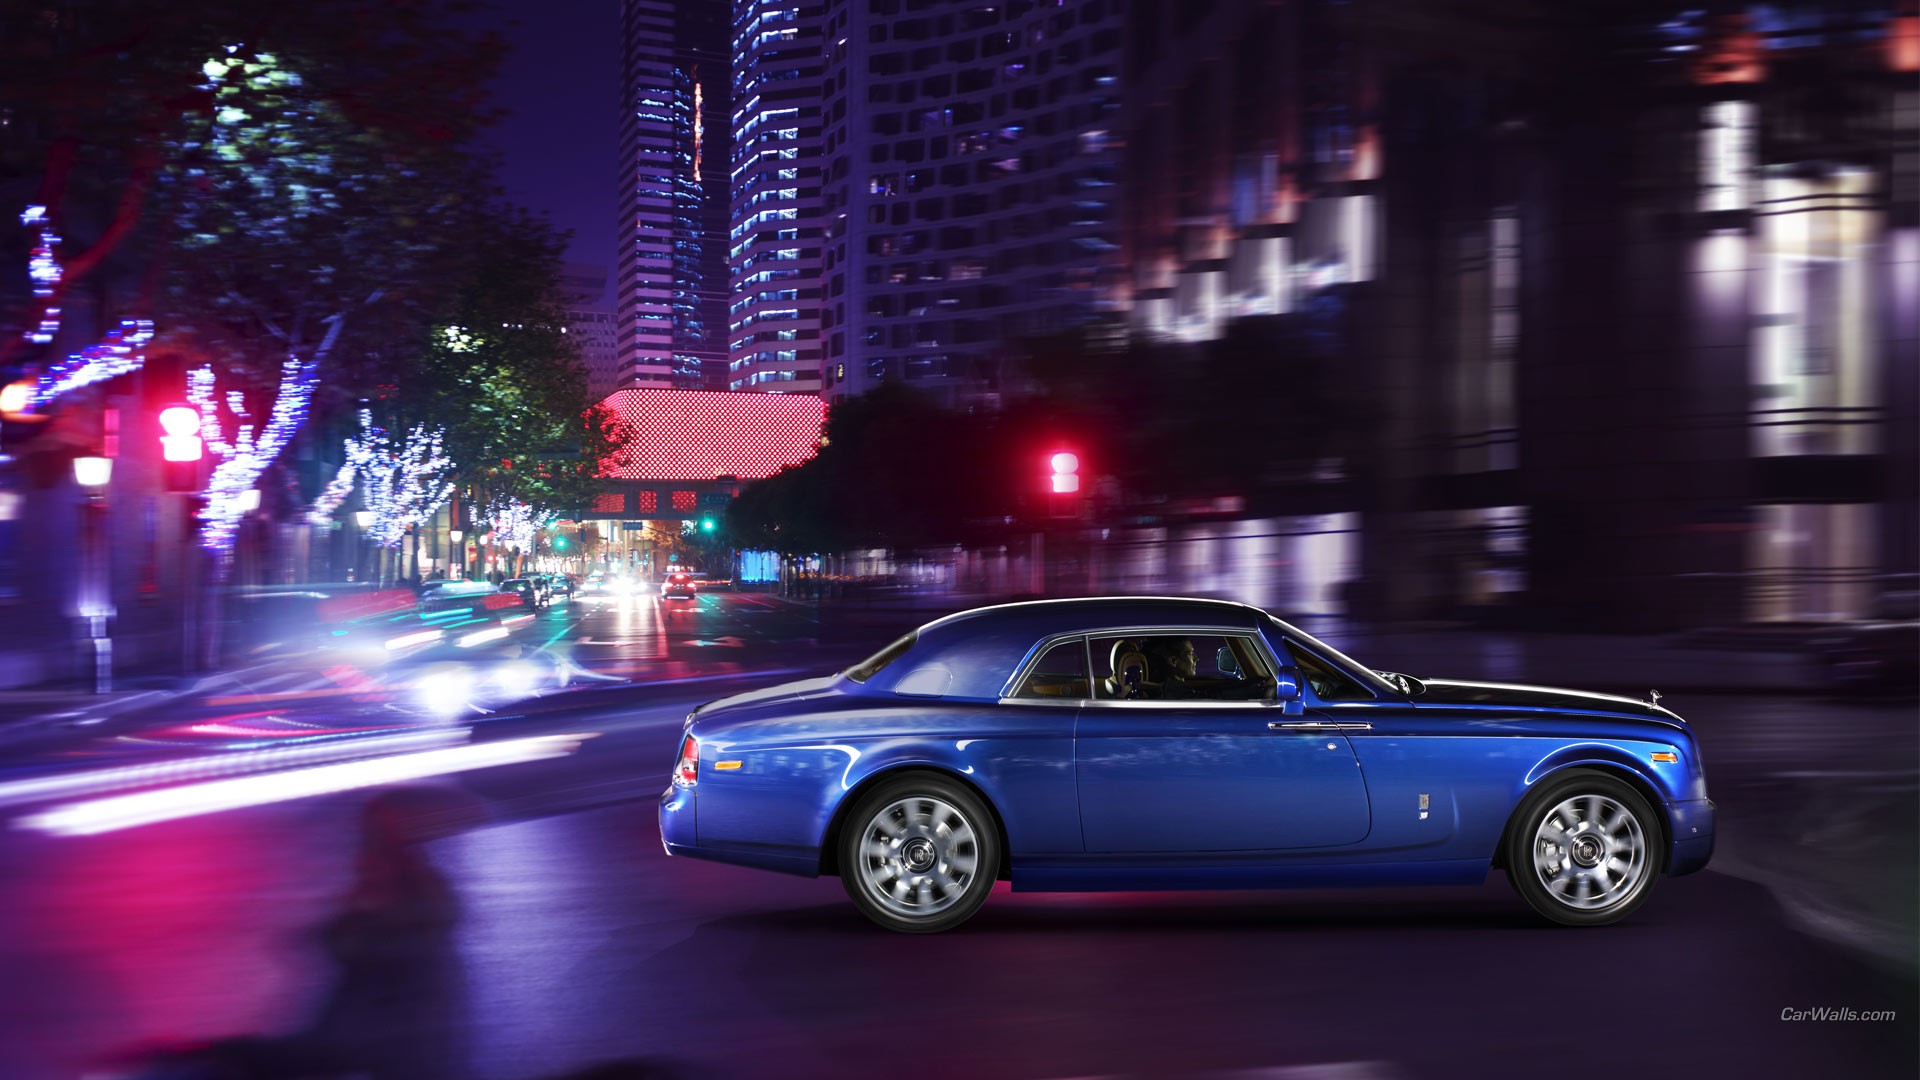 General 1920x1080 Rolls-Royce Phantom car blue cars Rolls-Royce vehicle city lights British cars Grand Tour watermarked side view blurred blurry background driving building city trees street lights street light